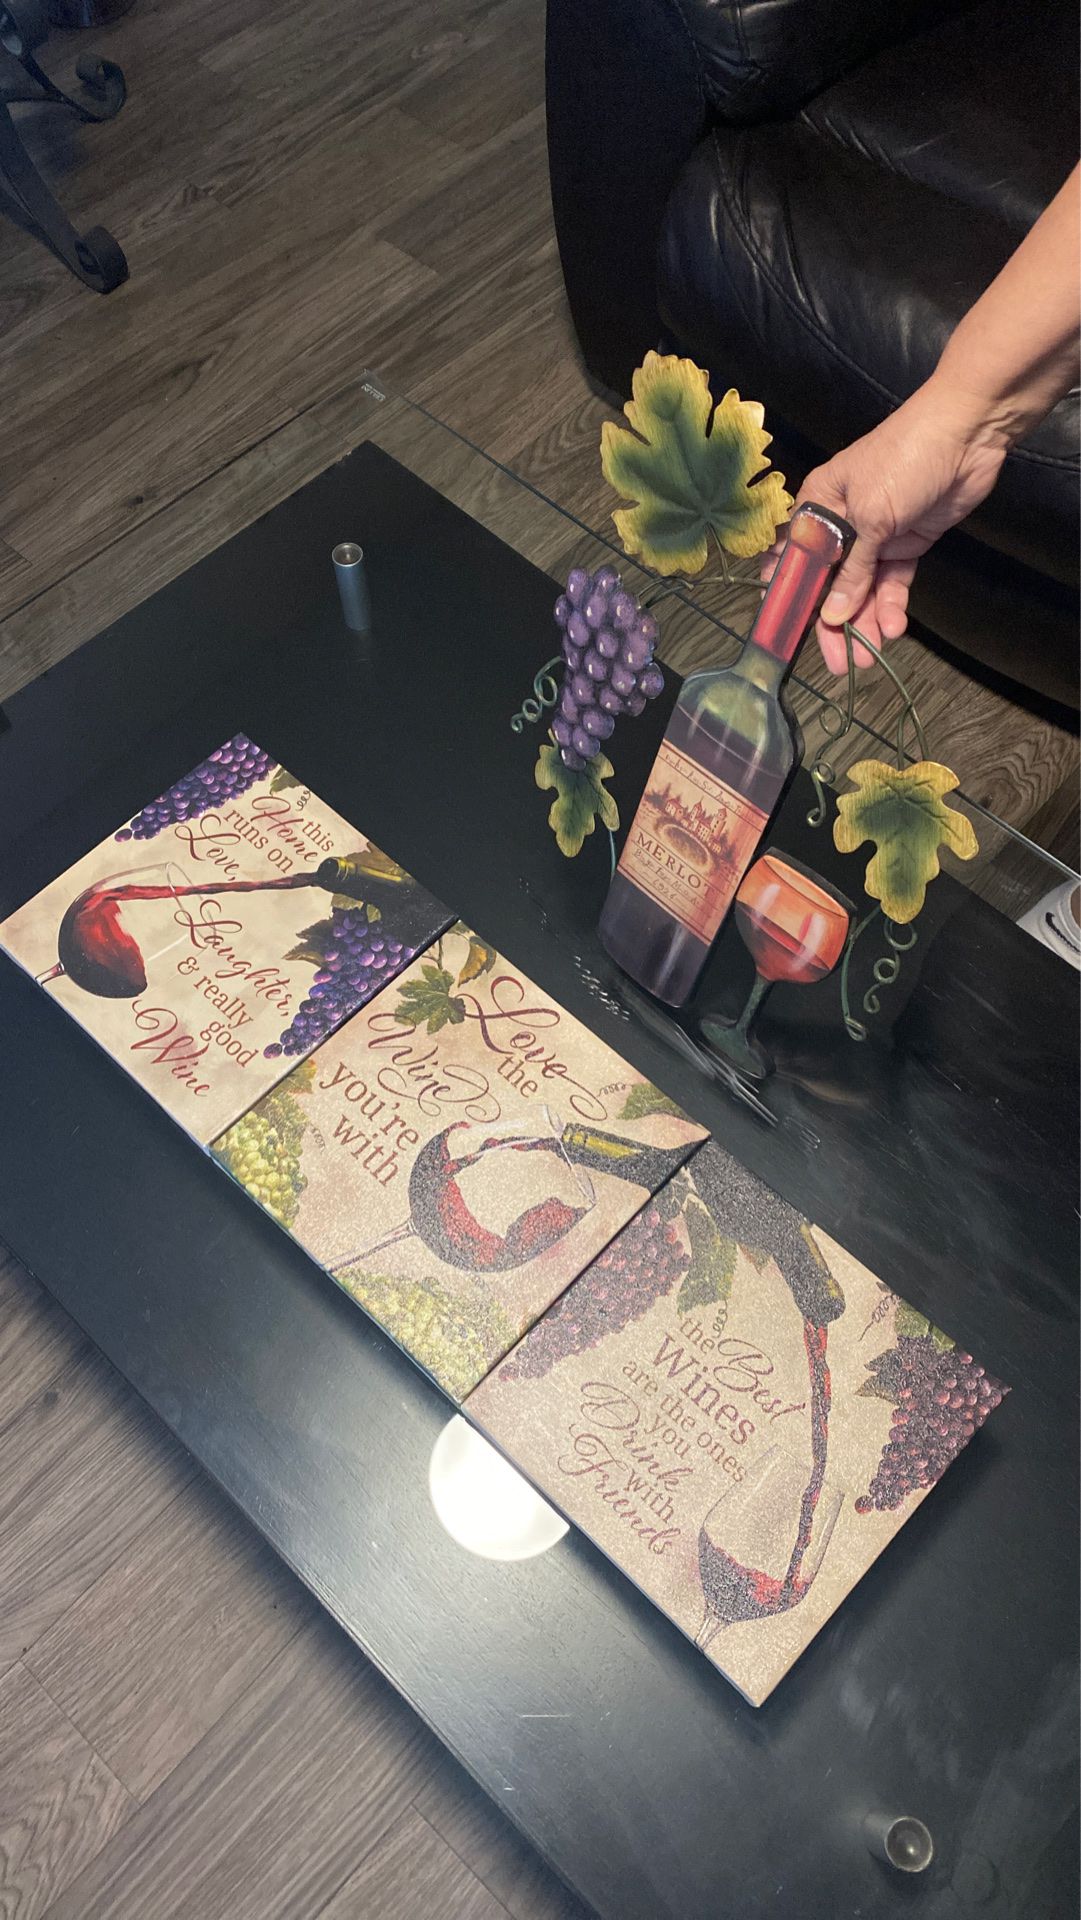 Grape pictures and wine Decor